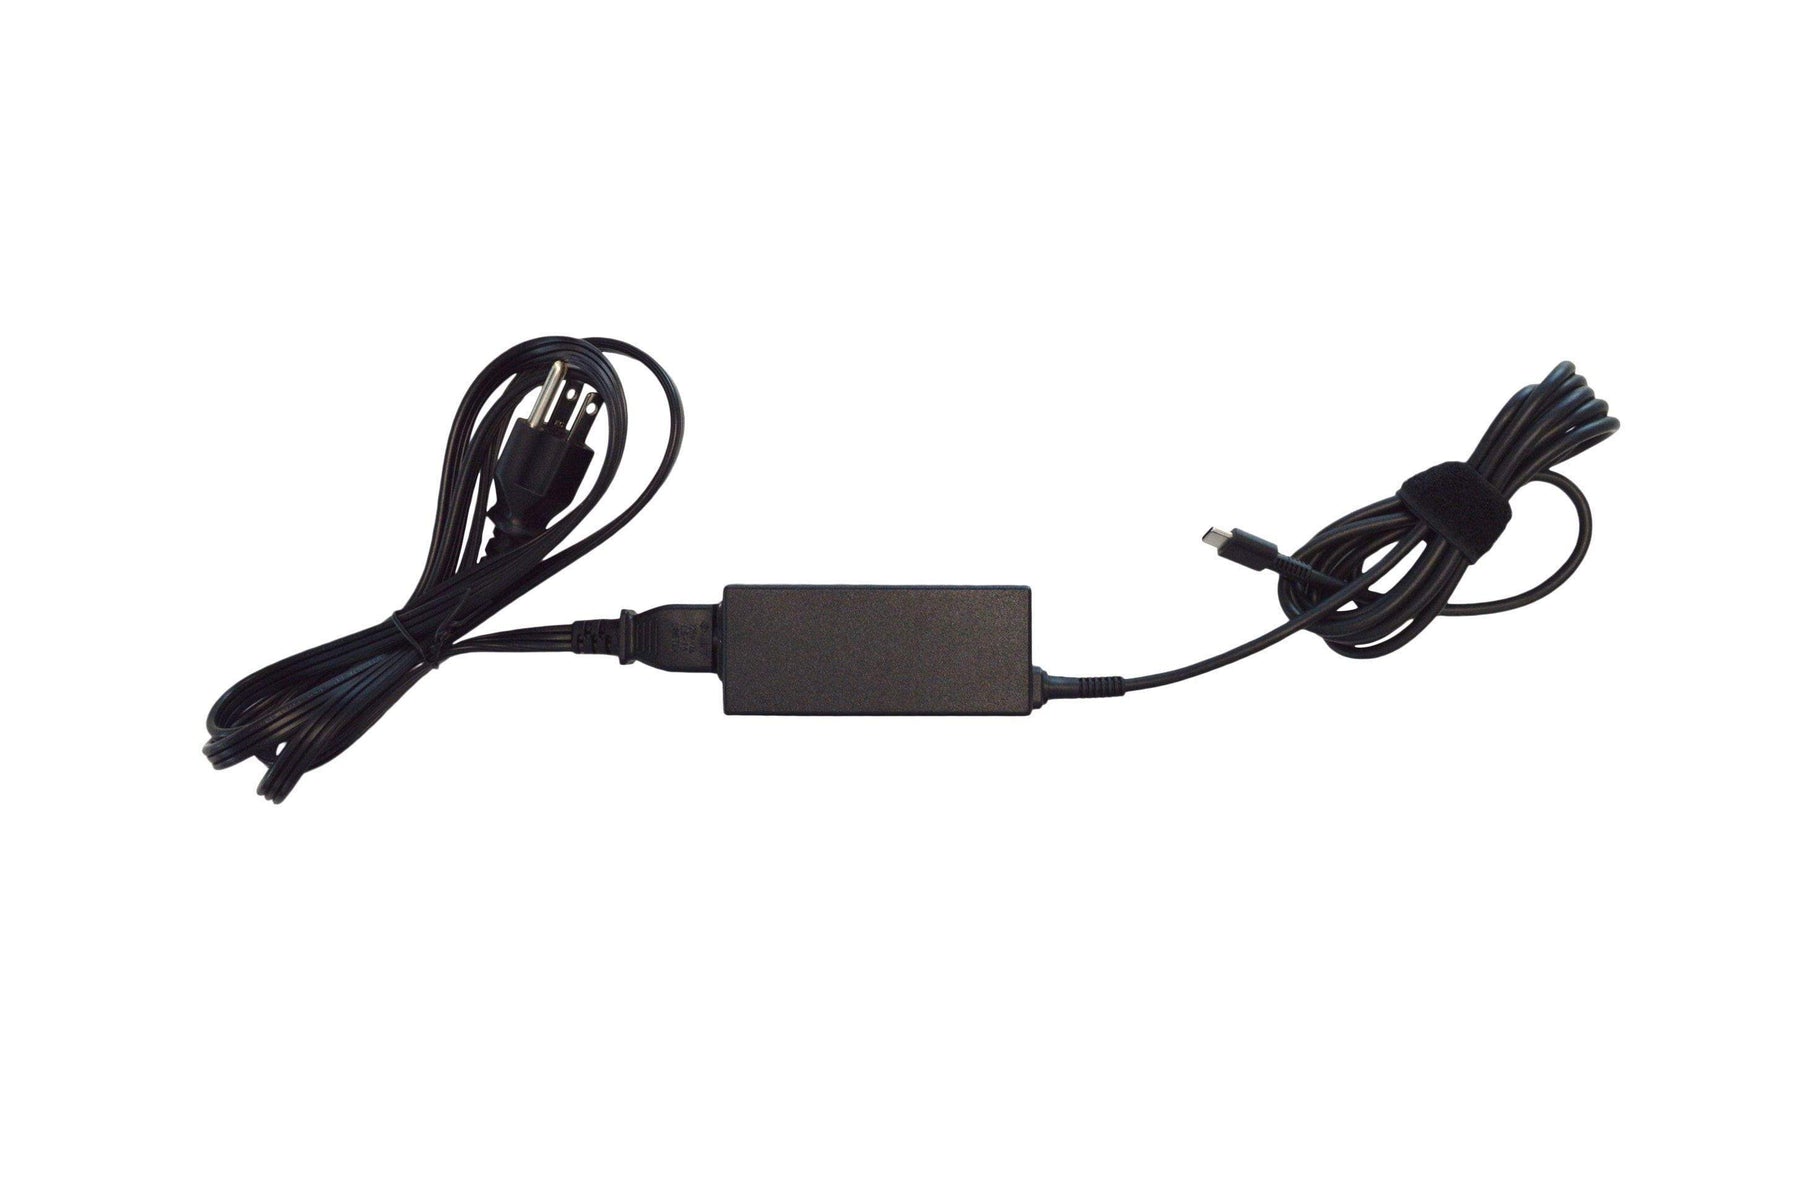 CTL Approved OEM USB C AC Adapter Supports NL7/NL71/NL72/J41/PX/VX11 Models (45W)